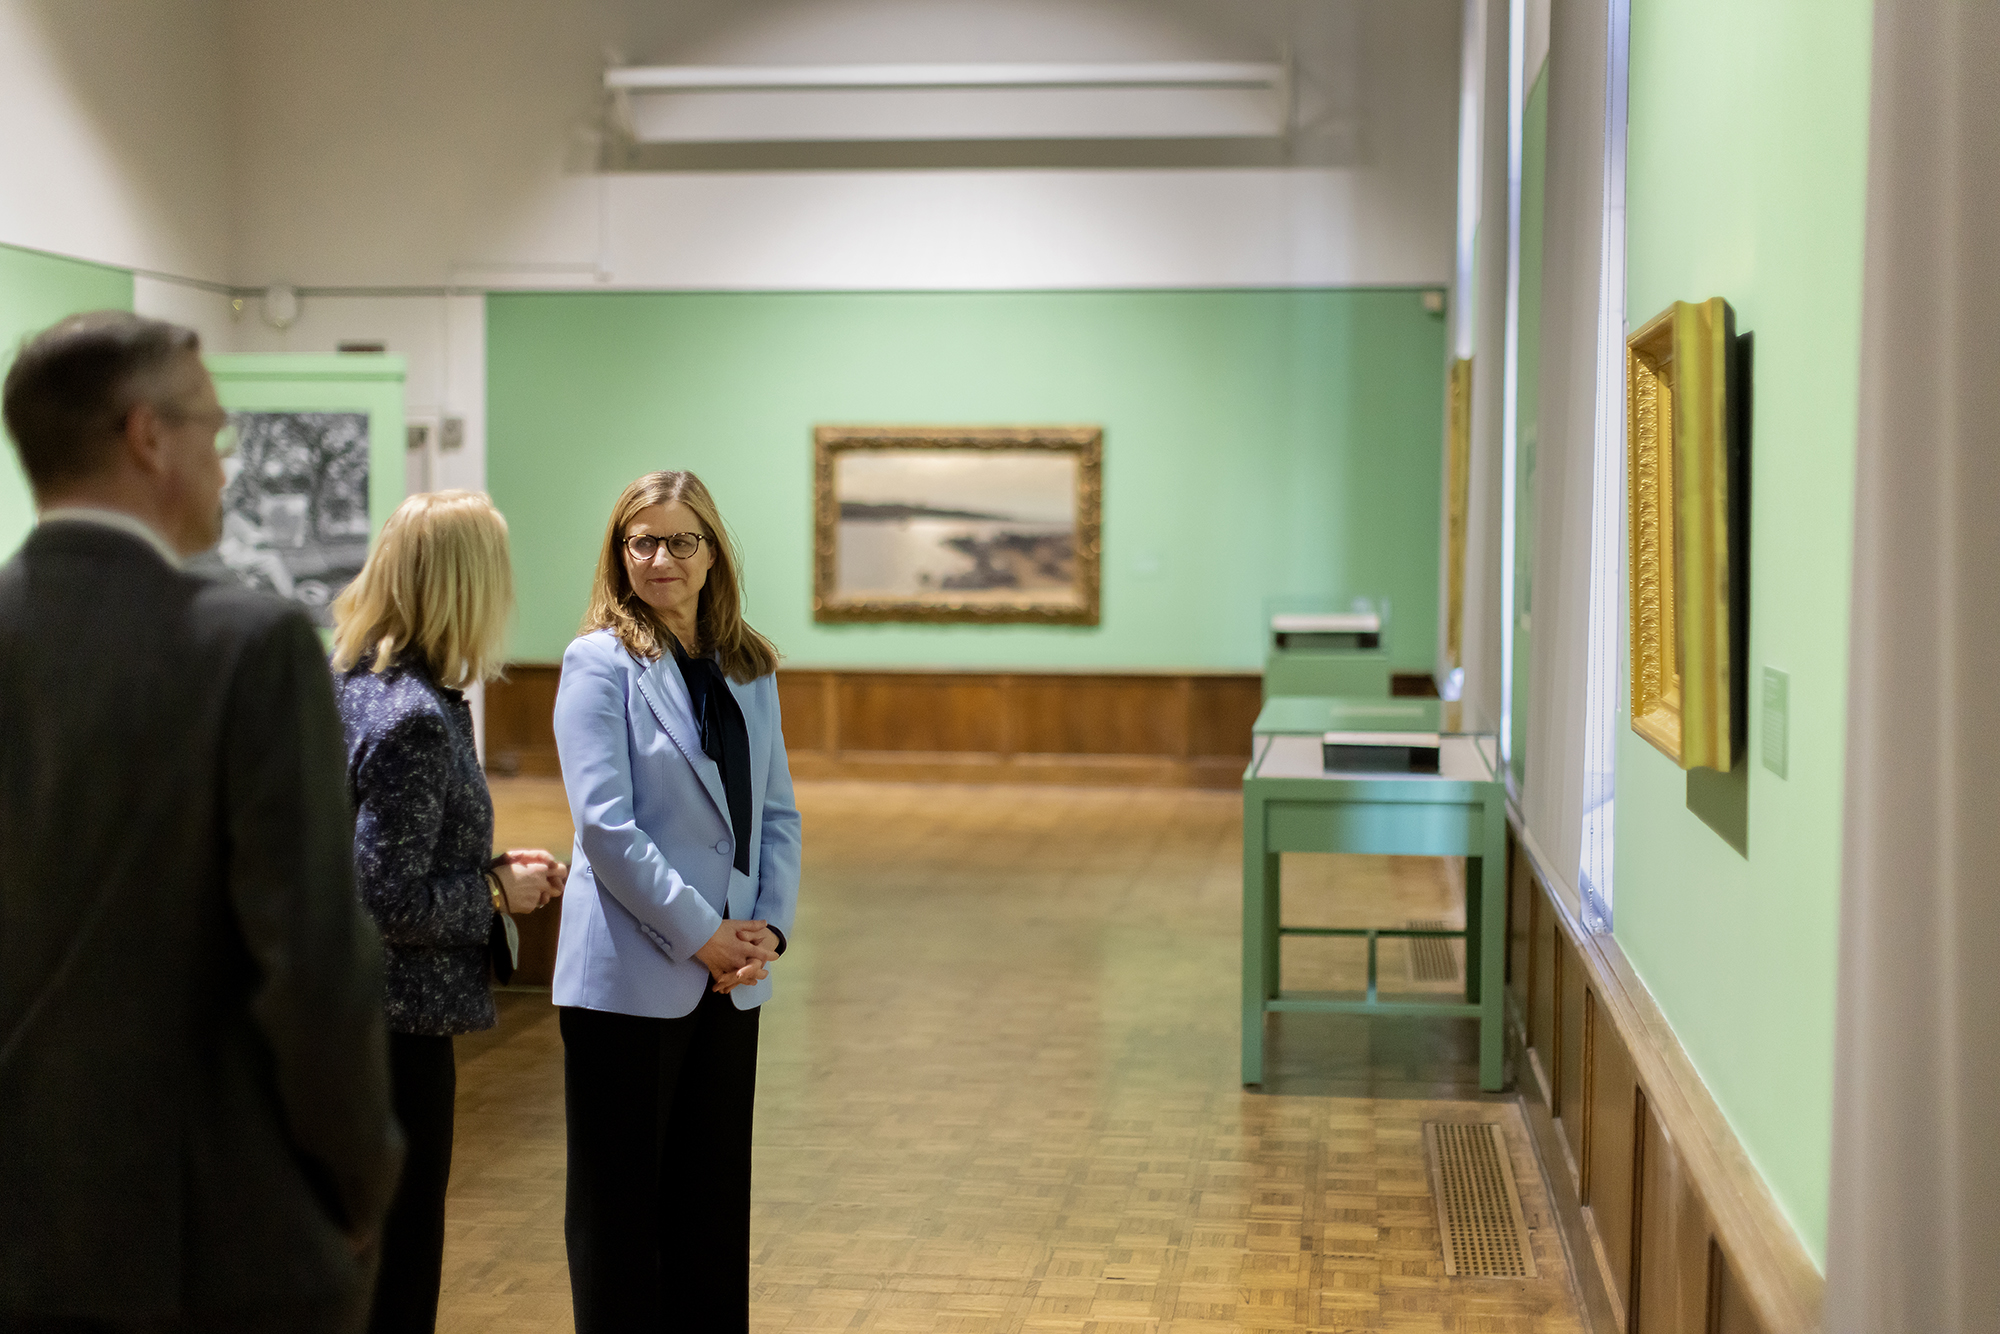 President Magill previews the Arthur Ross Gallery’s newest exhibition